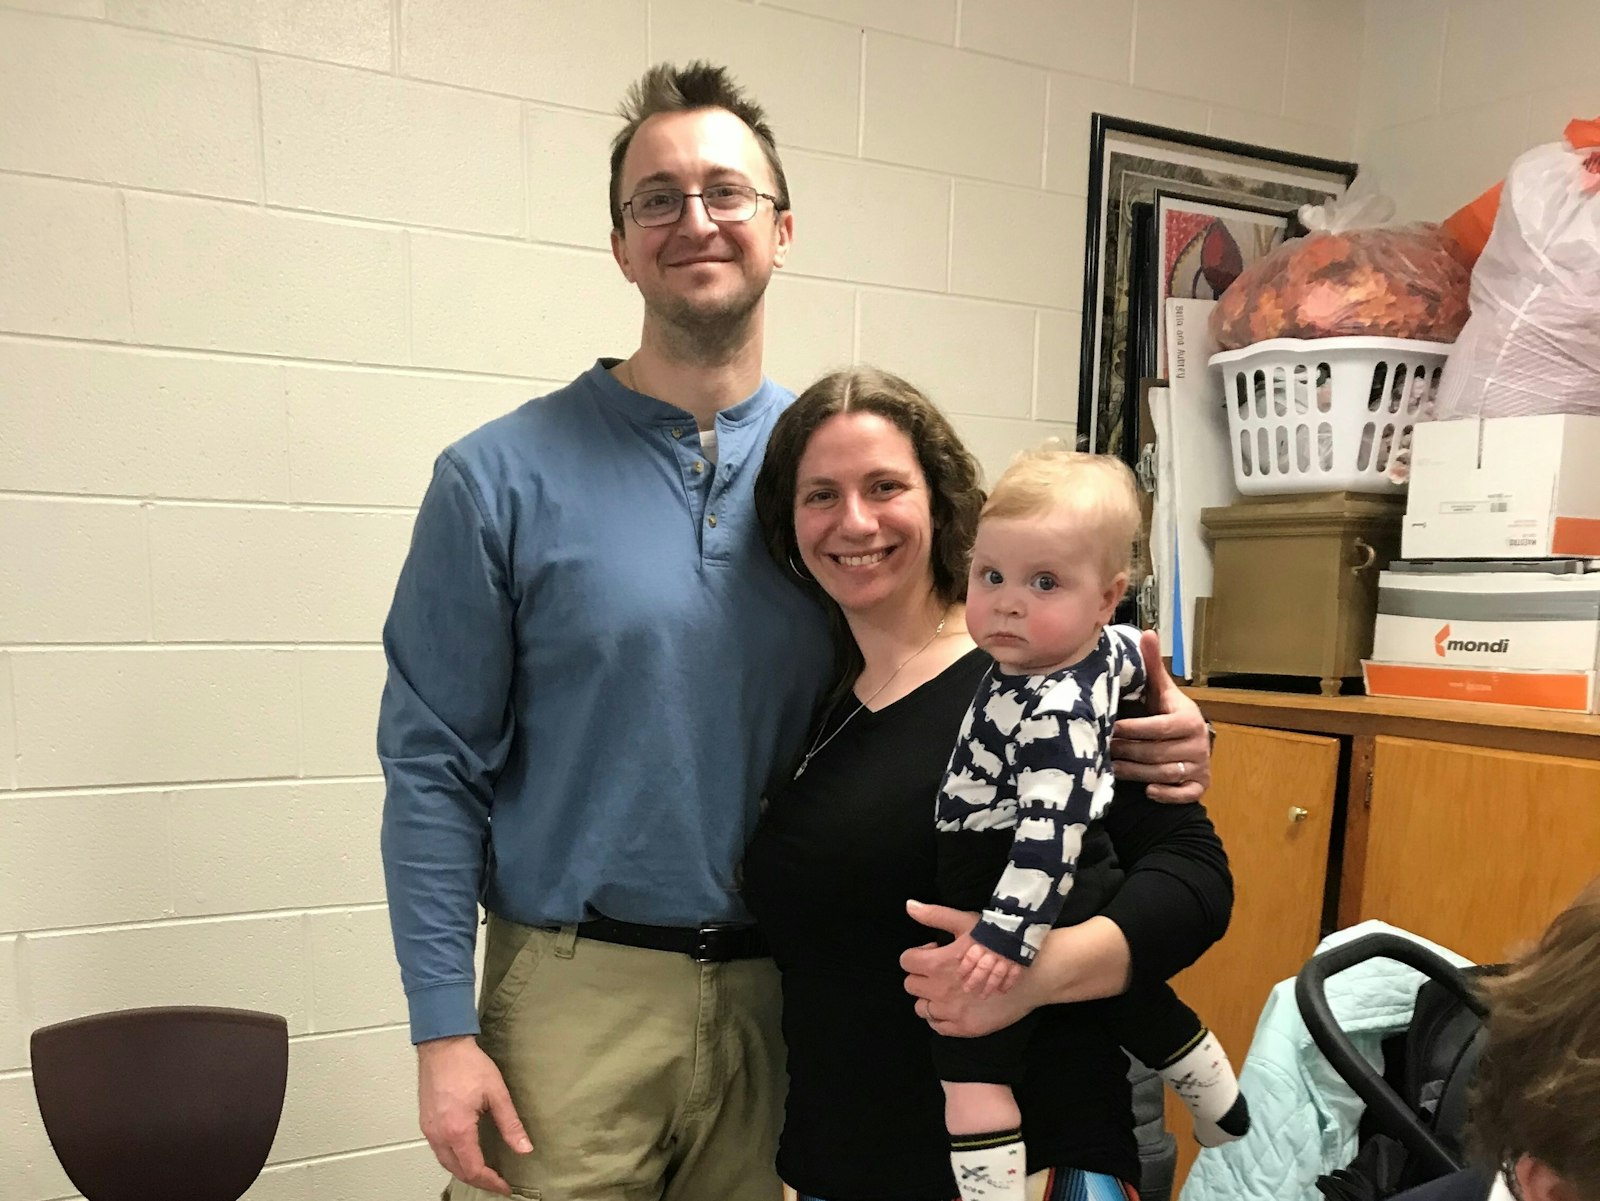 Everest Collegiate teacher Maria Masalskis-Hardie, pictured with her husband and son, said it was edifying to see students standing up for the cause of life and growing to become leaders in the pro-life movement.